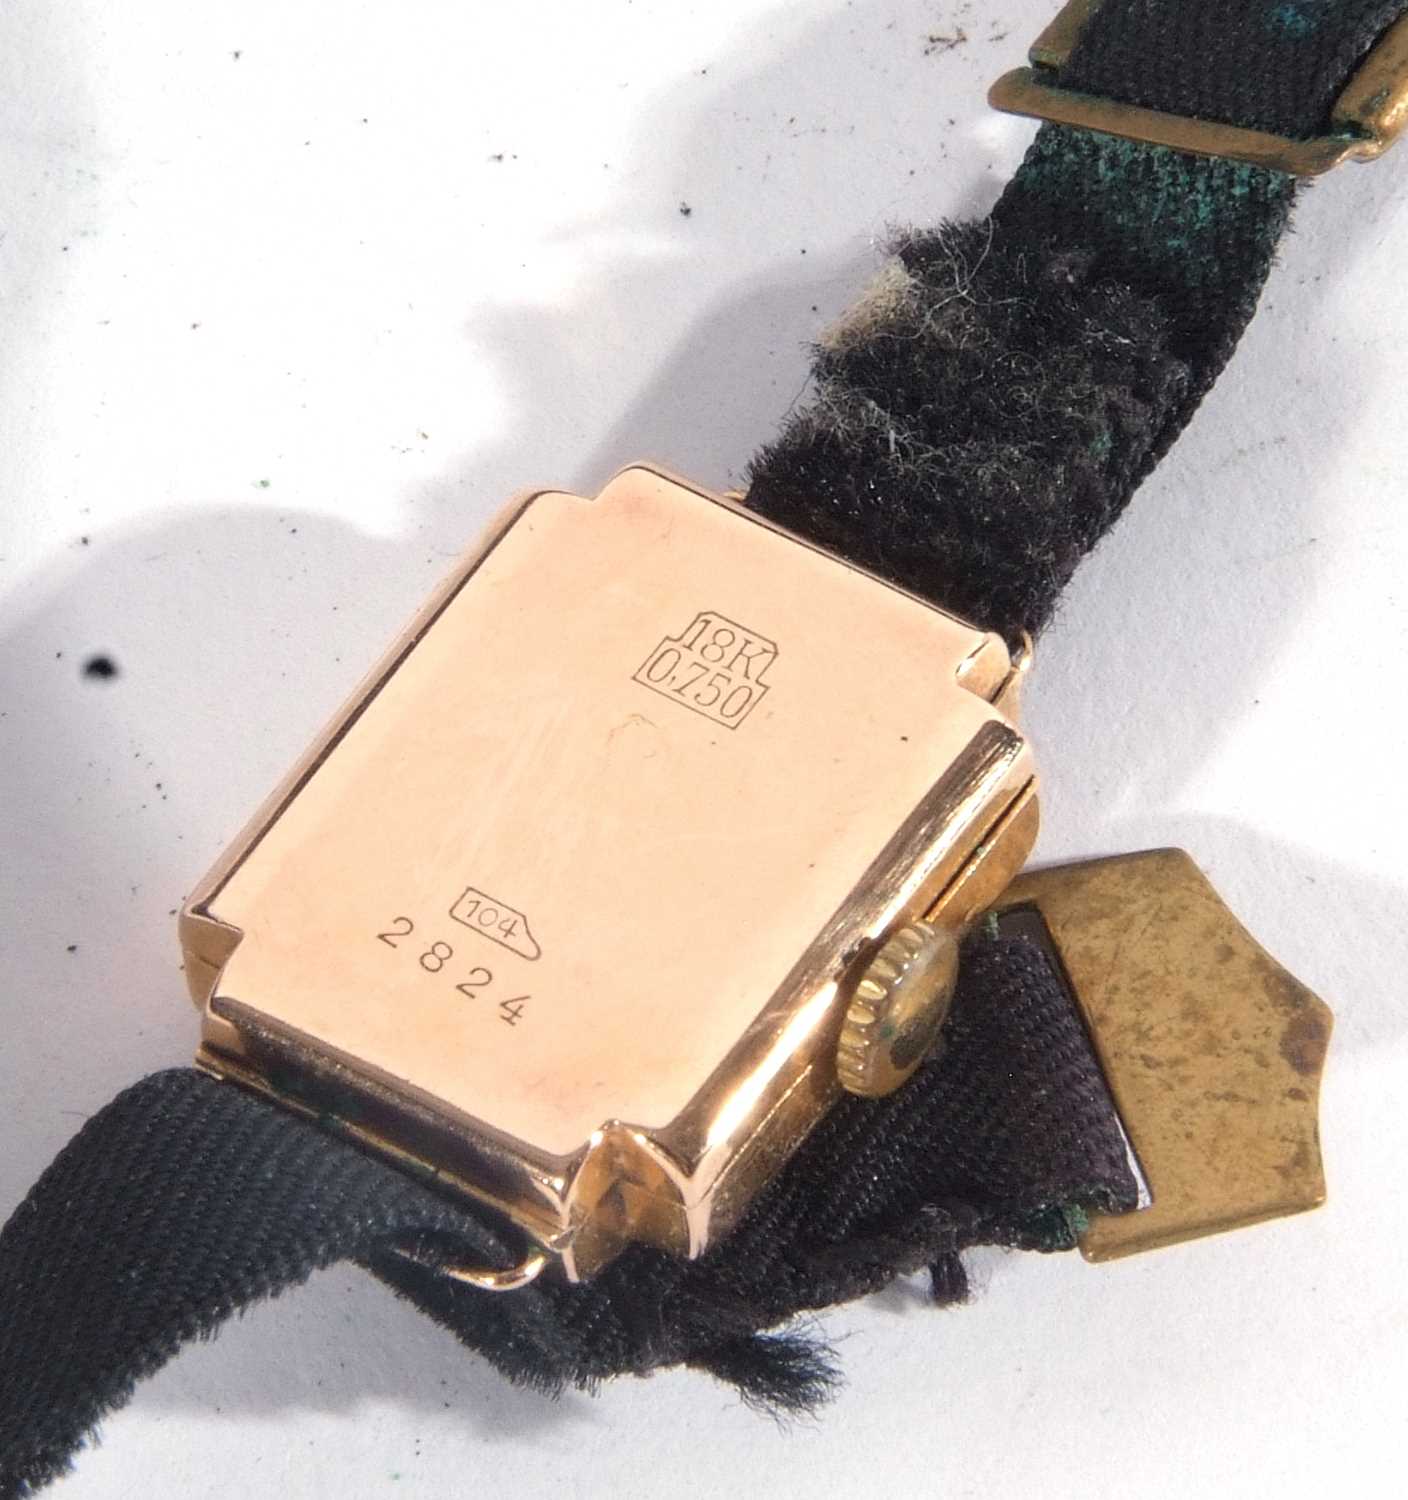 18ct gold ladies cocktail watch. Stamped on the back of the case "750 18L". Manually crown wound - Image 4 of 5